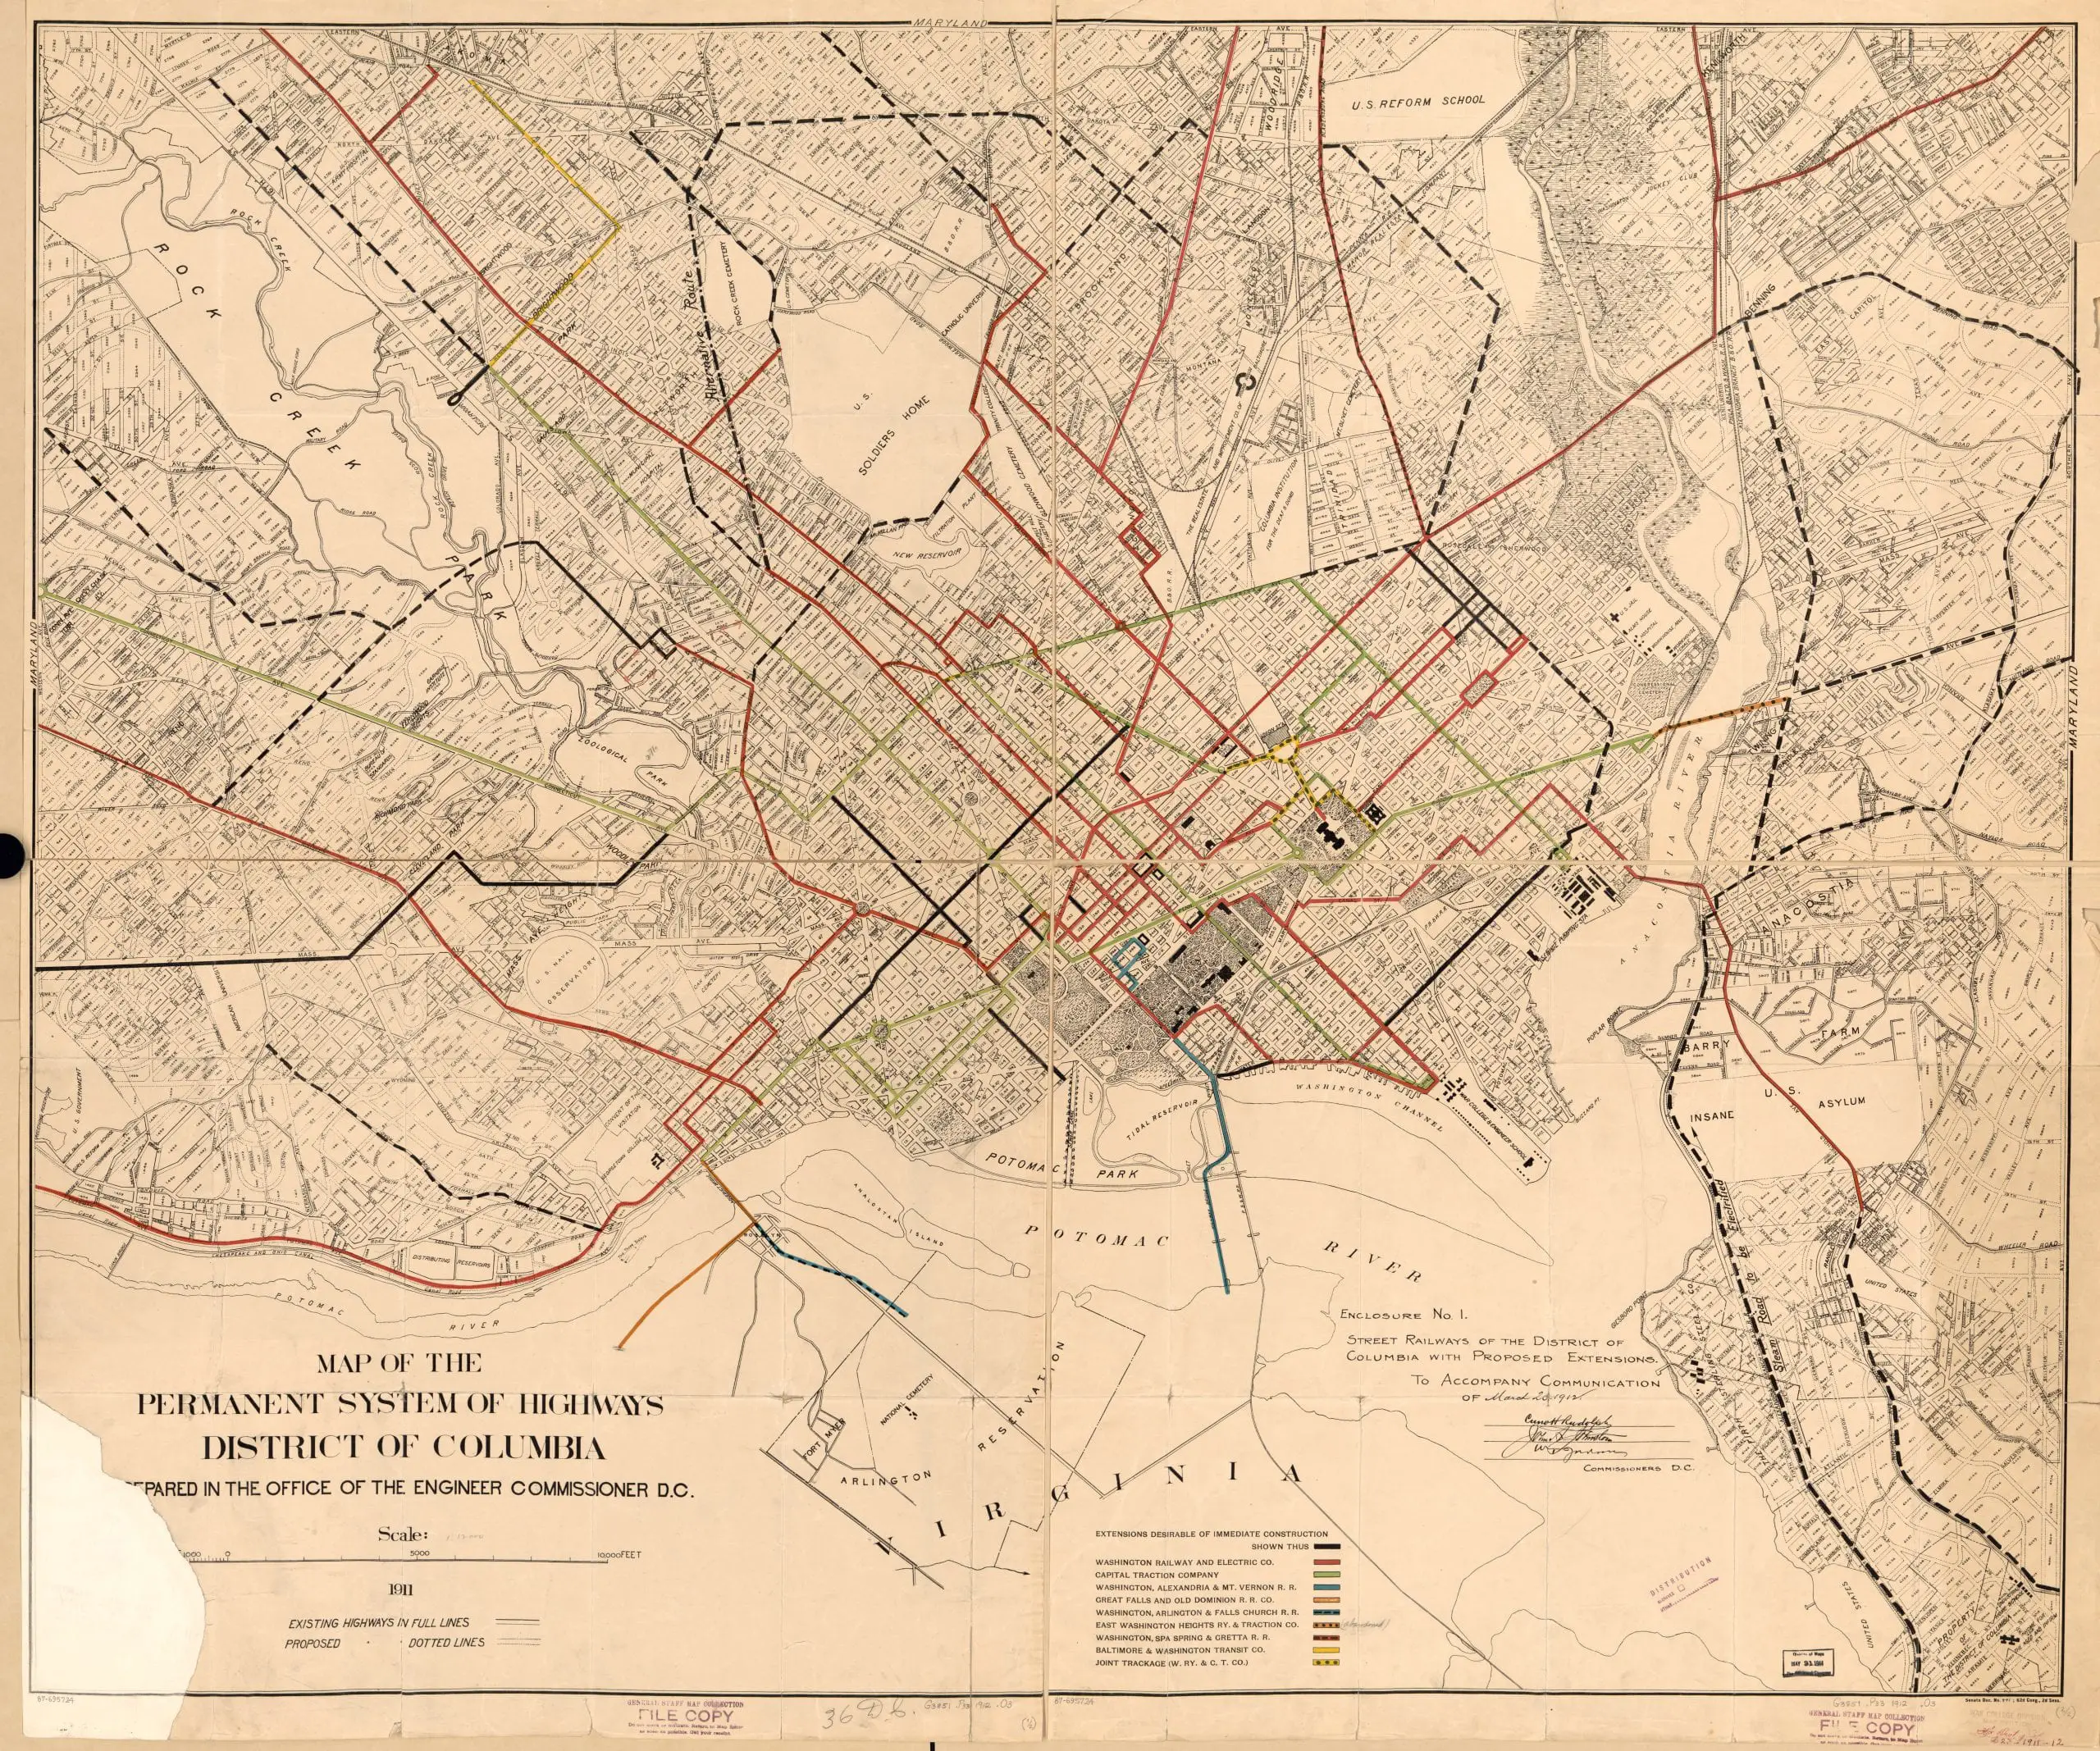 Street railways of the District of Columbia with proposed extensions : to accompany communication of March 20, 1912.